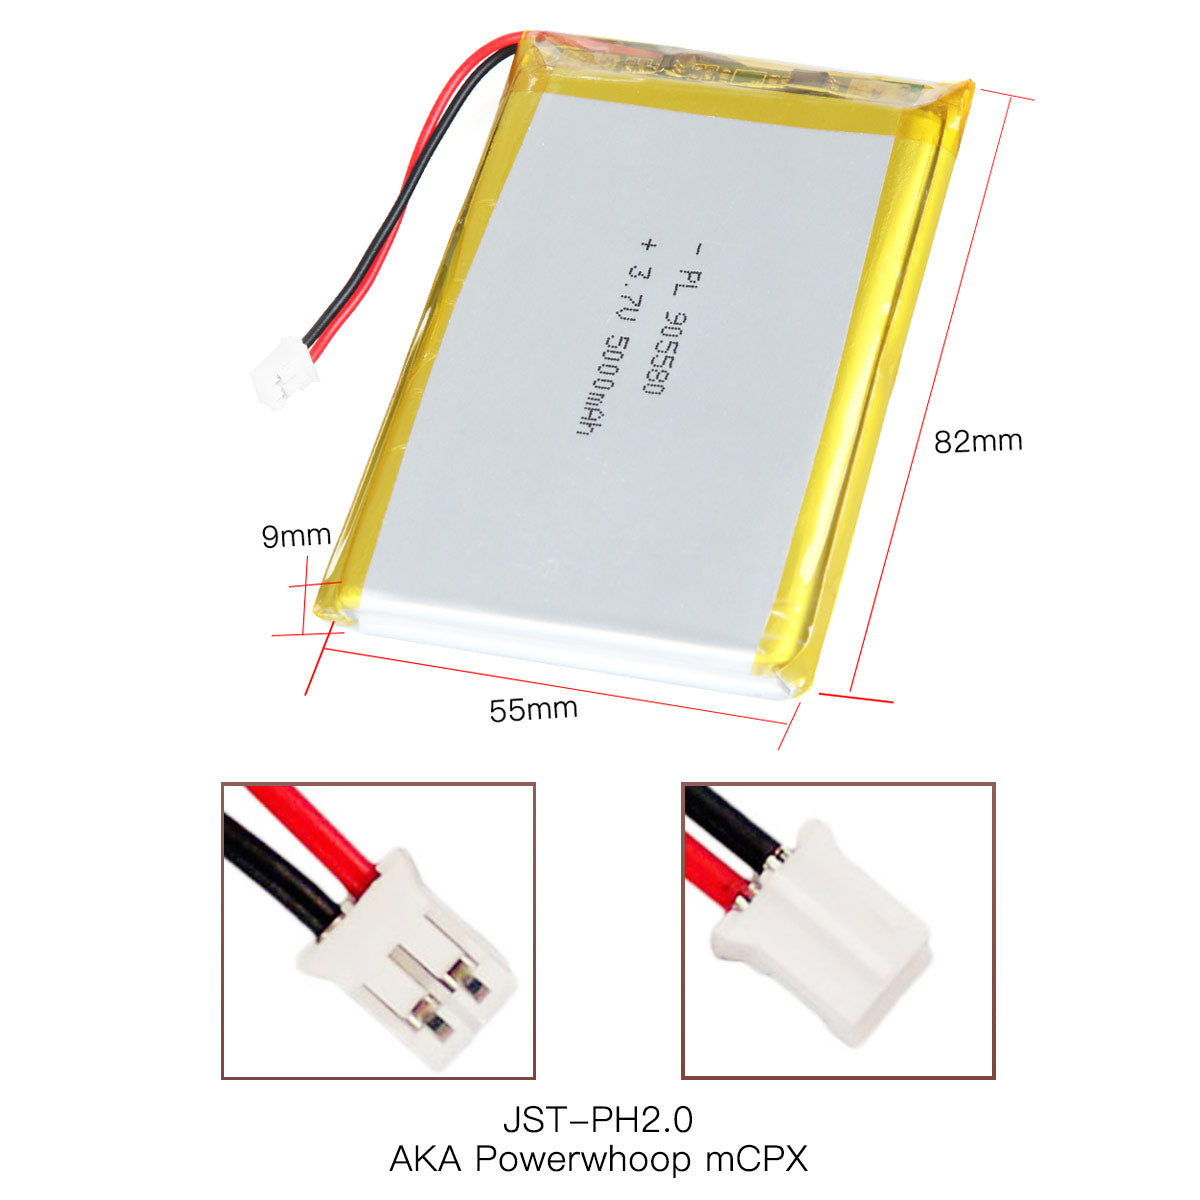 YDL 3.7V 5000mAh 905580 Rechargeable Lithium Polymer Battery